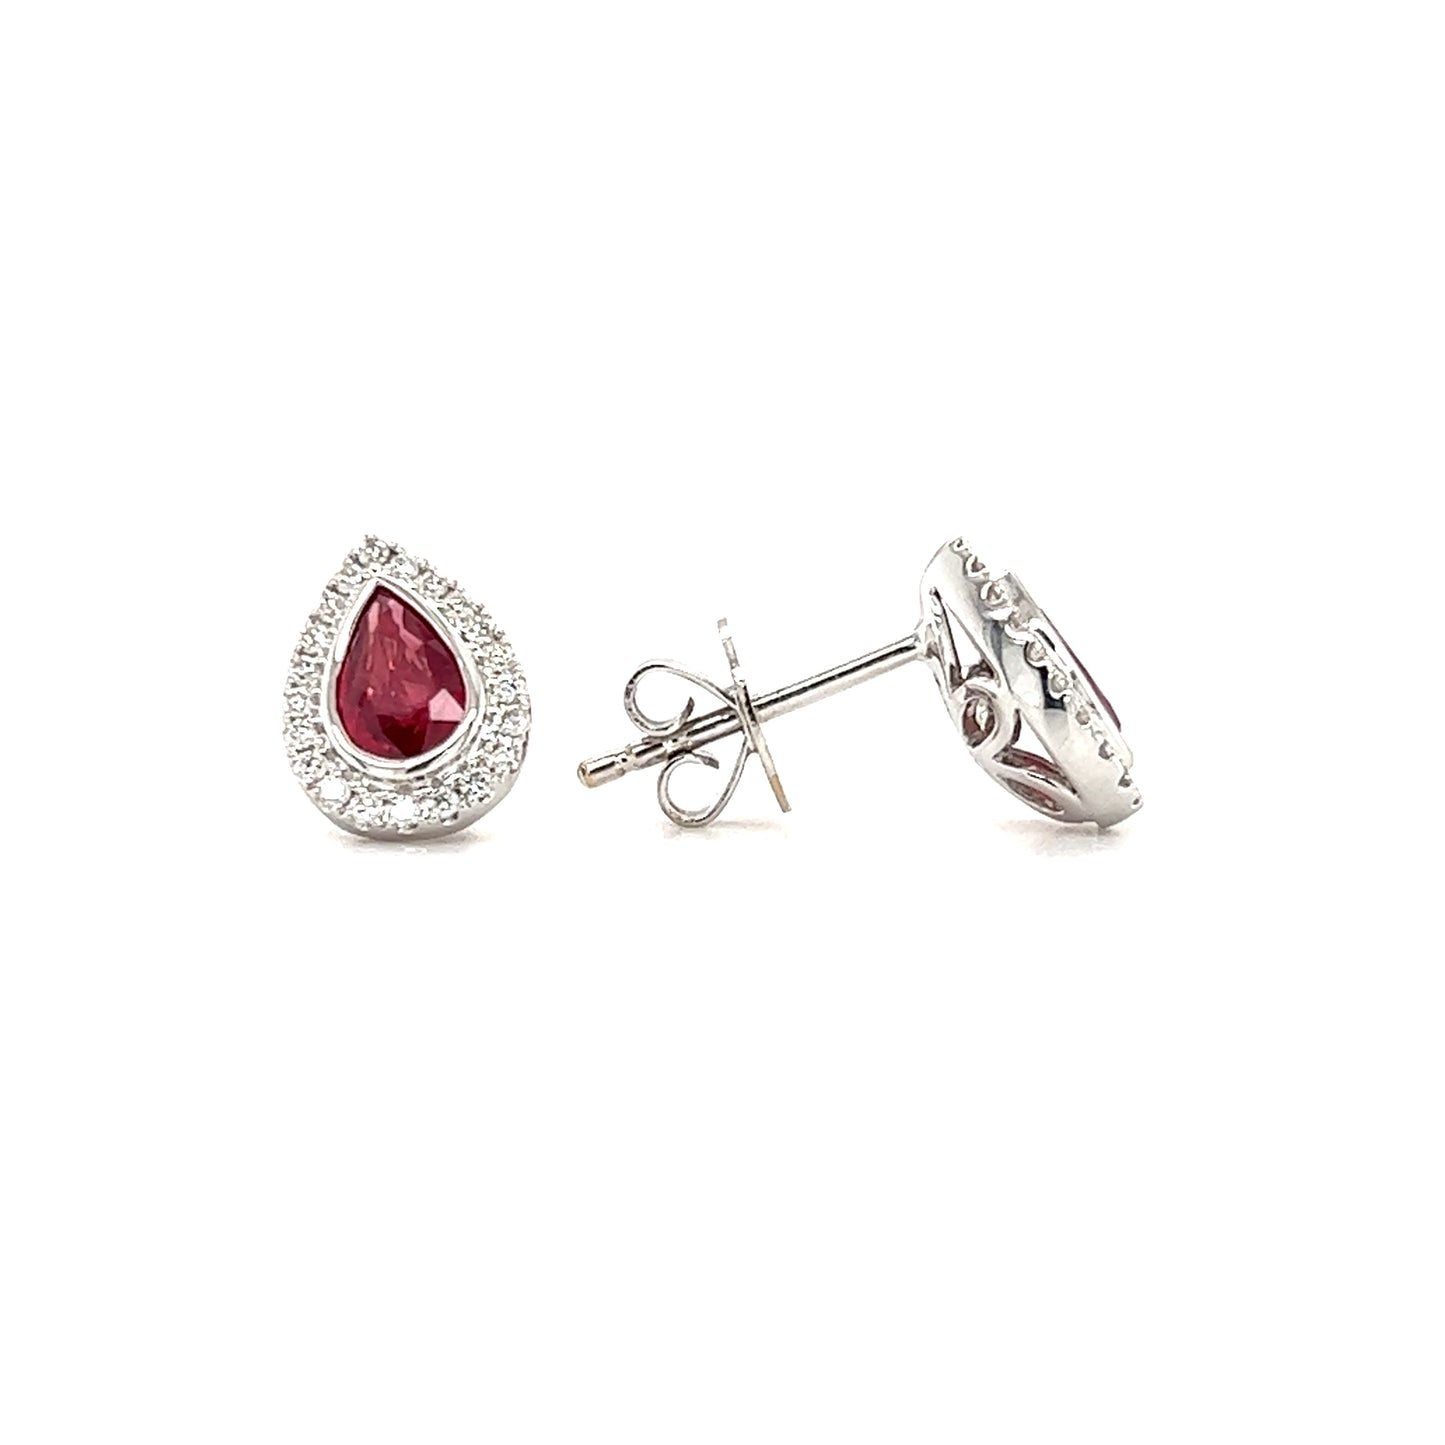 Pear Ruby Stud Earrings with Diamond Halo in 18K White Gold Front and Side View